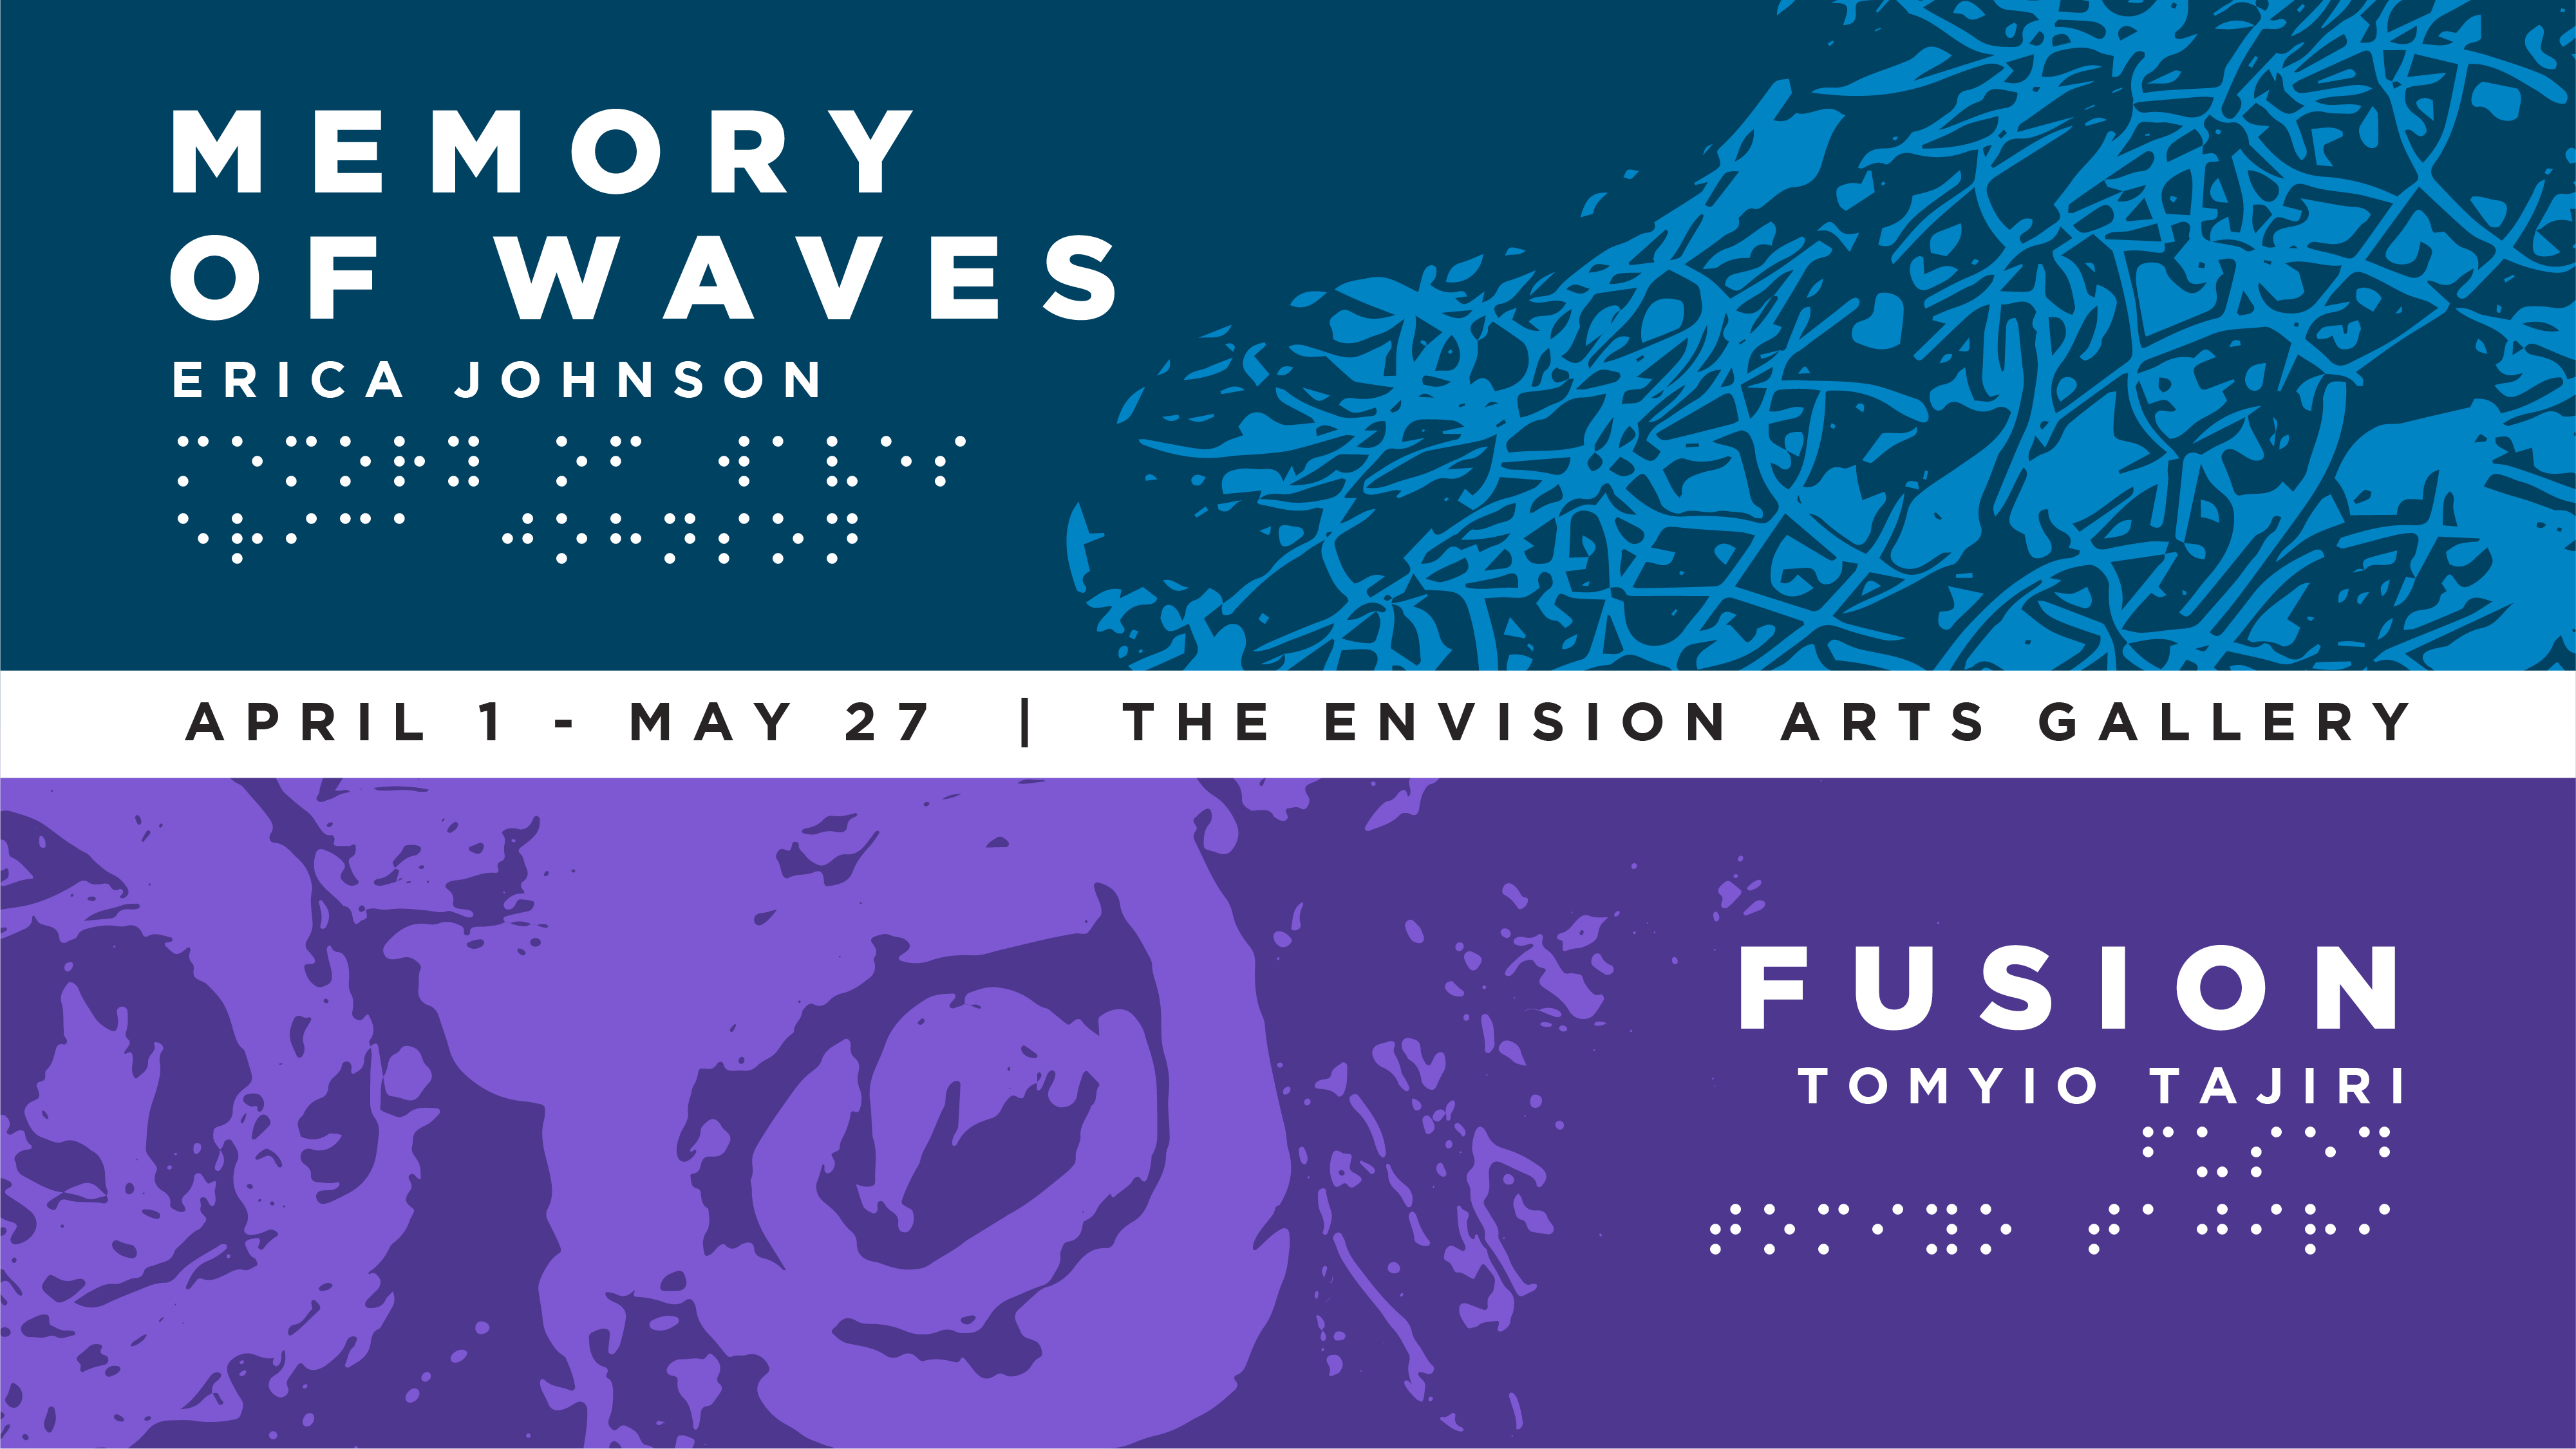 The Envision Arts Gallery & Community Engagement Center is proud to present two solo exhibitions to take place throughout April and May. 𝗪𝗵𝗲𝗿𝗲 𝘁𝗵𝗲 𝗦𝗸𝘆 𝗧𝗼𝘂𝗰𝗵𝗲𝘀 𝘁𝗵𝗲 𝗦𝗲𝗮 opening April 1. Fusion by Tomiyo Tajiri and 𝙈𝙚𝙢𝙤𝙧𝙮 𝙤𝙛 𝙒𝙖𝙫𝙚𝙨 𝗯𝘆 𝗘𝗿𝗶𝗰𝗮 𝗝𝗼𝗵𝗻𝘀𝗼𝗻 